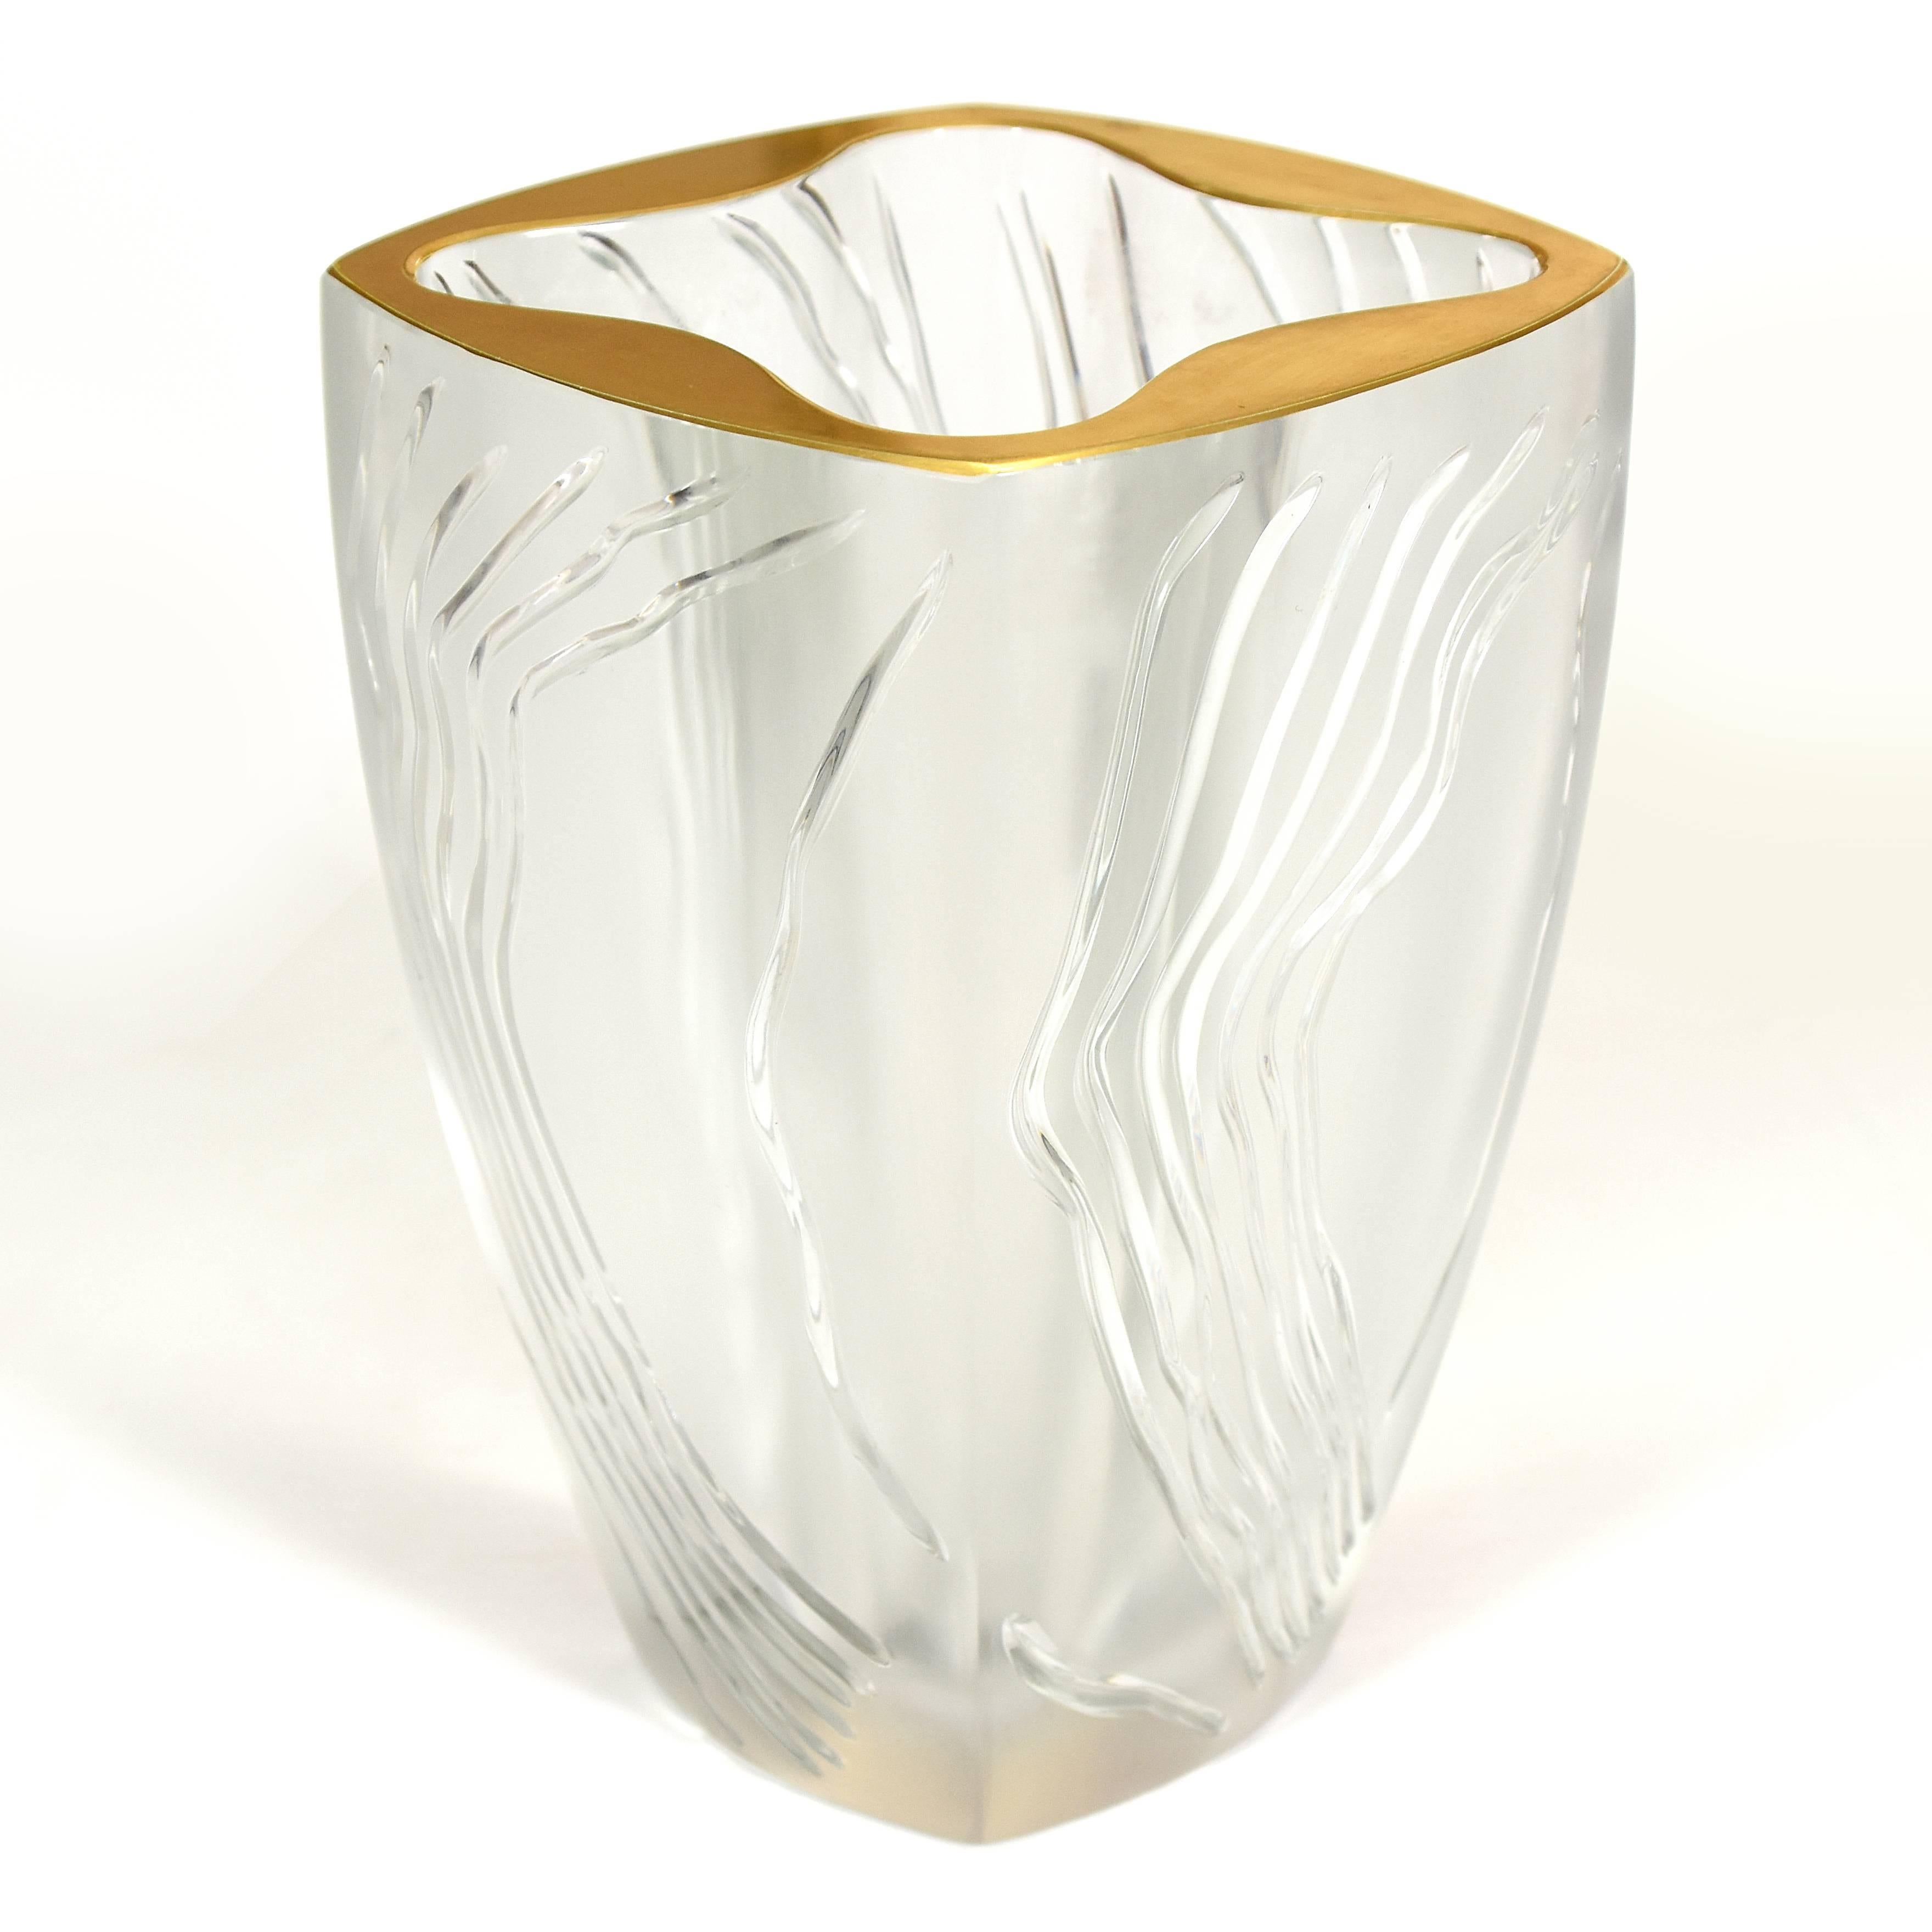 Modern Lalique Limited Edition 'Yasna' Vase with a Gold Detail, circa 2000 For Sale